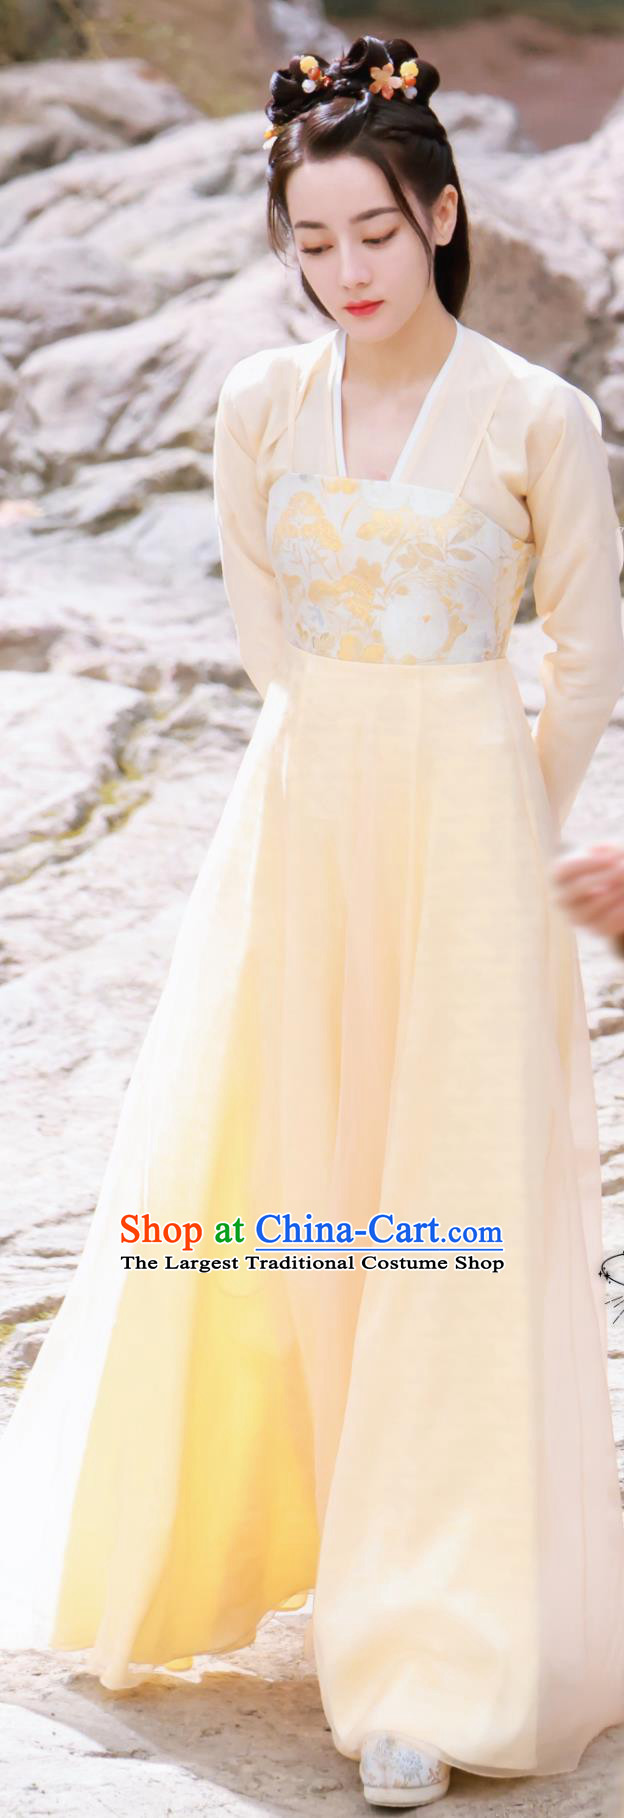 TV Series The Legend of An Le Heroine Ren An Le Yellow Dress Ancient China Swordswoman Clothing Traditional Woman Hanfu